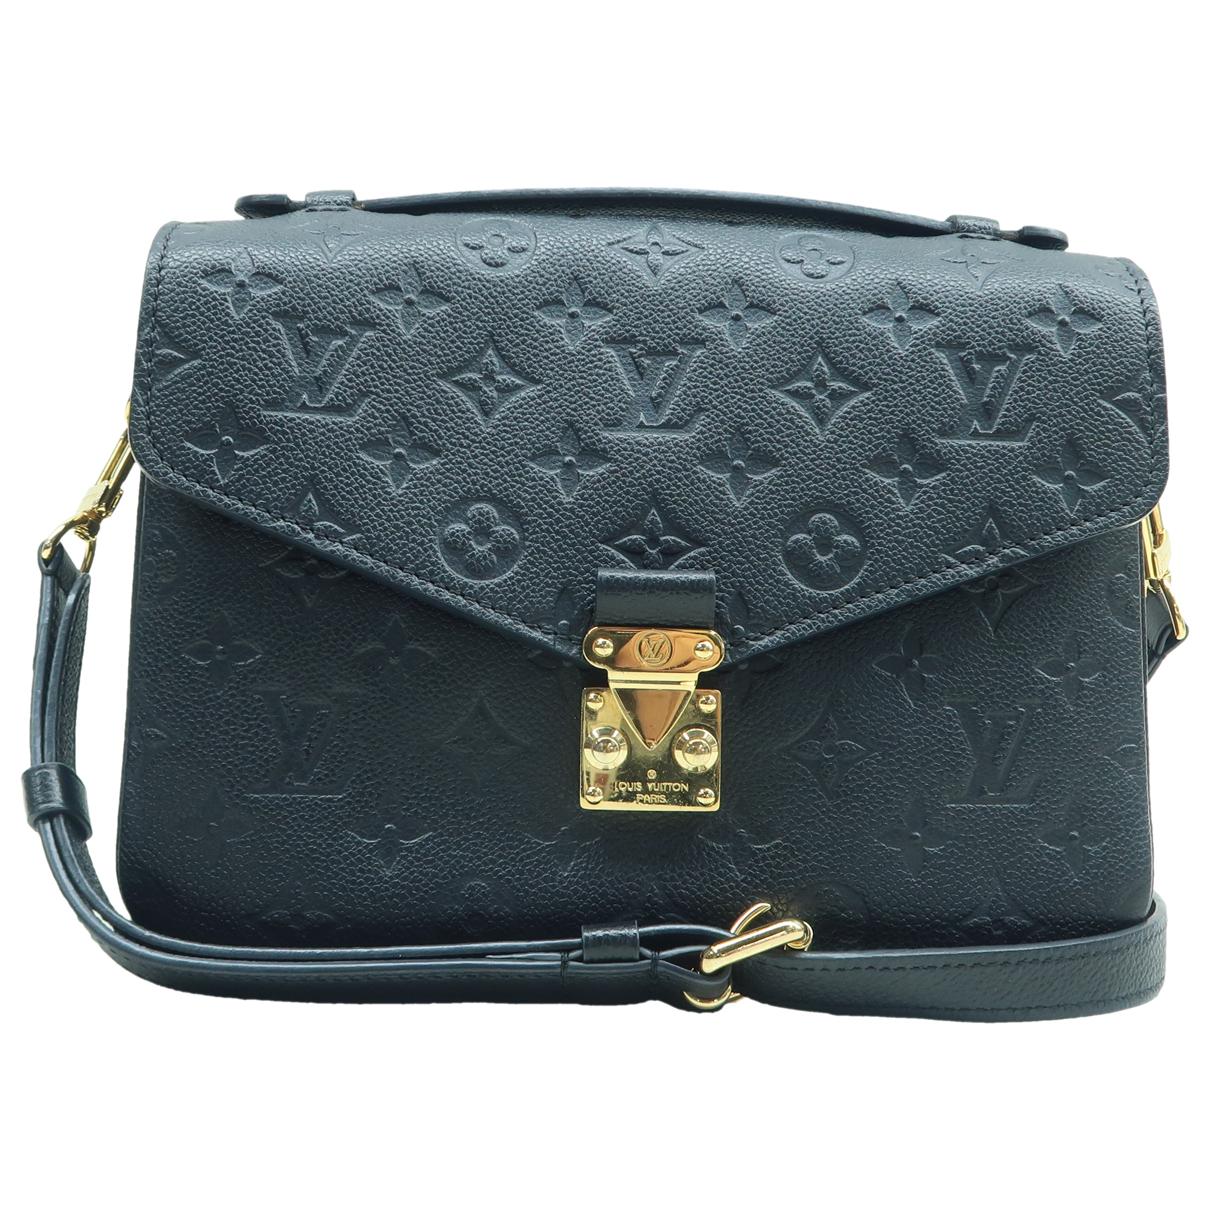 Metis leather satchel Louis Vuitton Black in Leather - 36493202